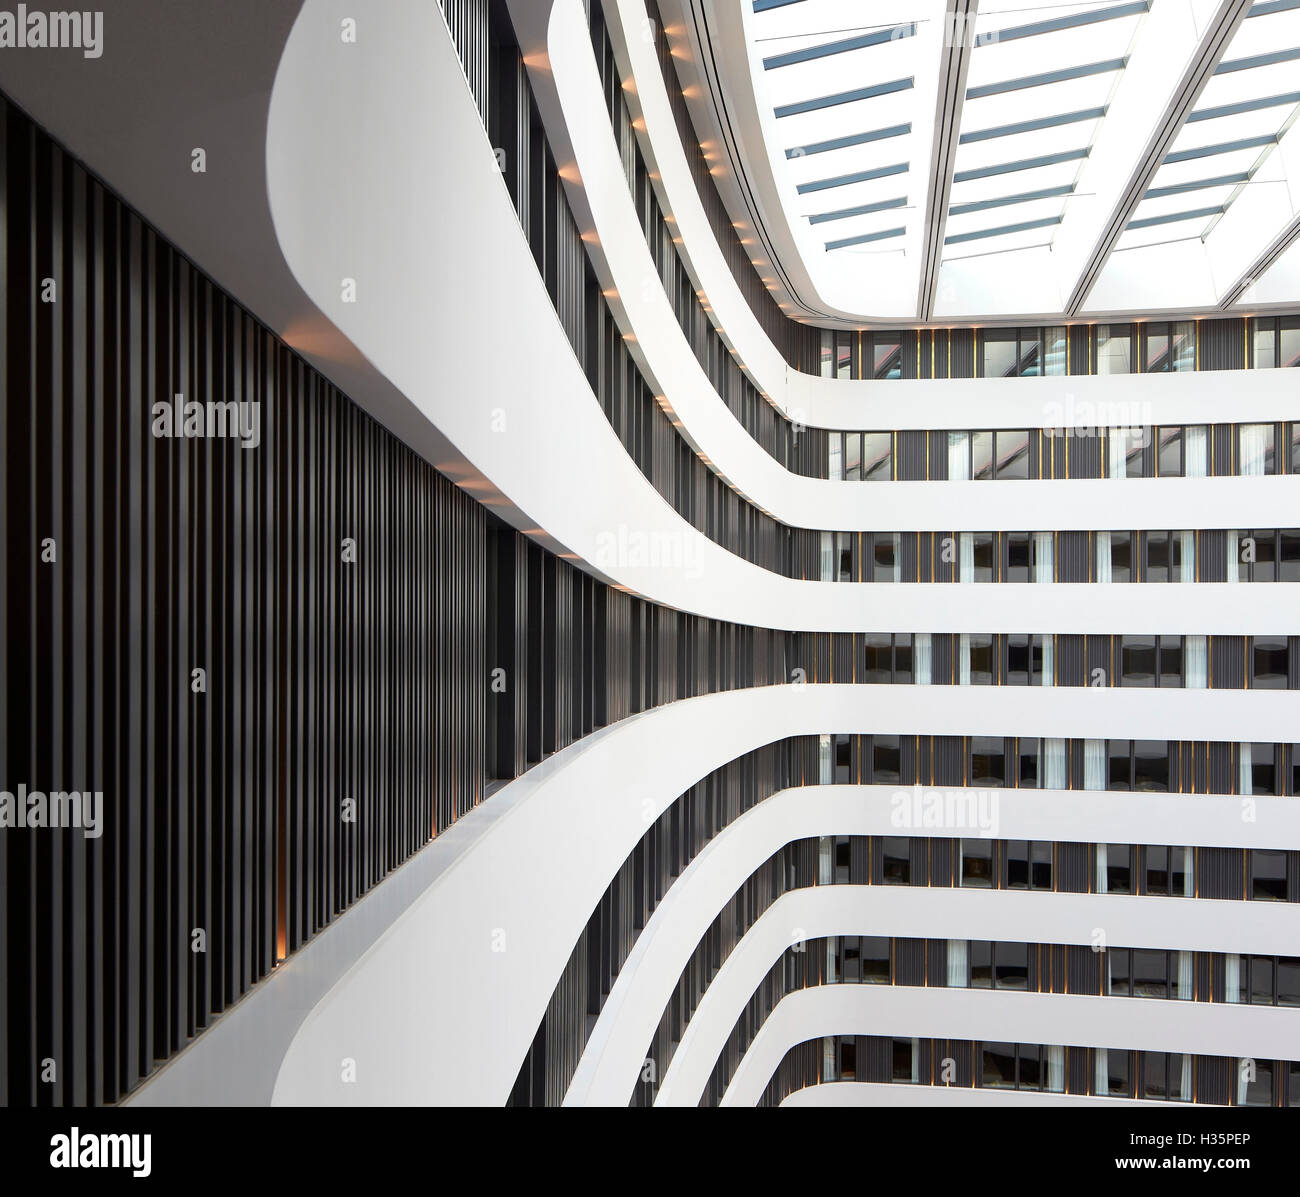 Graphic perspective  of white balustrades. Hilton Amsterdam Airport Schiphol, Amsterdam, Netherlands. Architect: Mecanoo Architects, 2015. Stock Photo